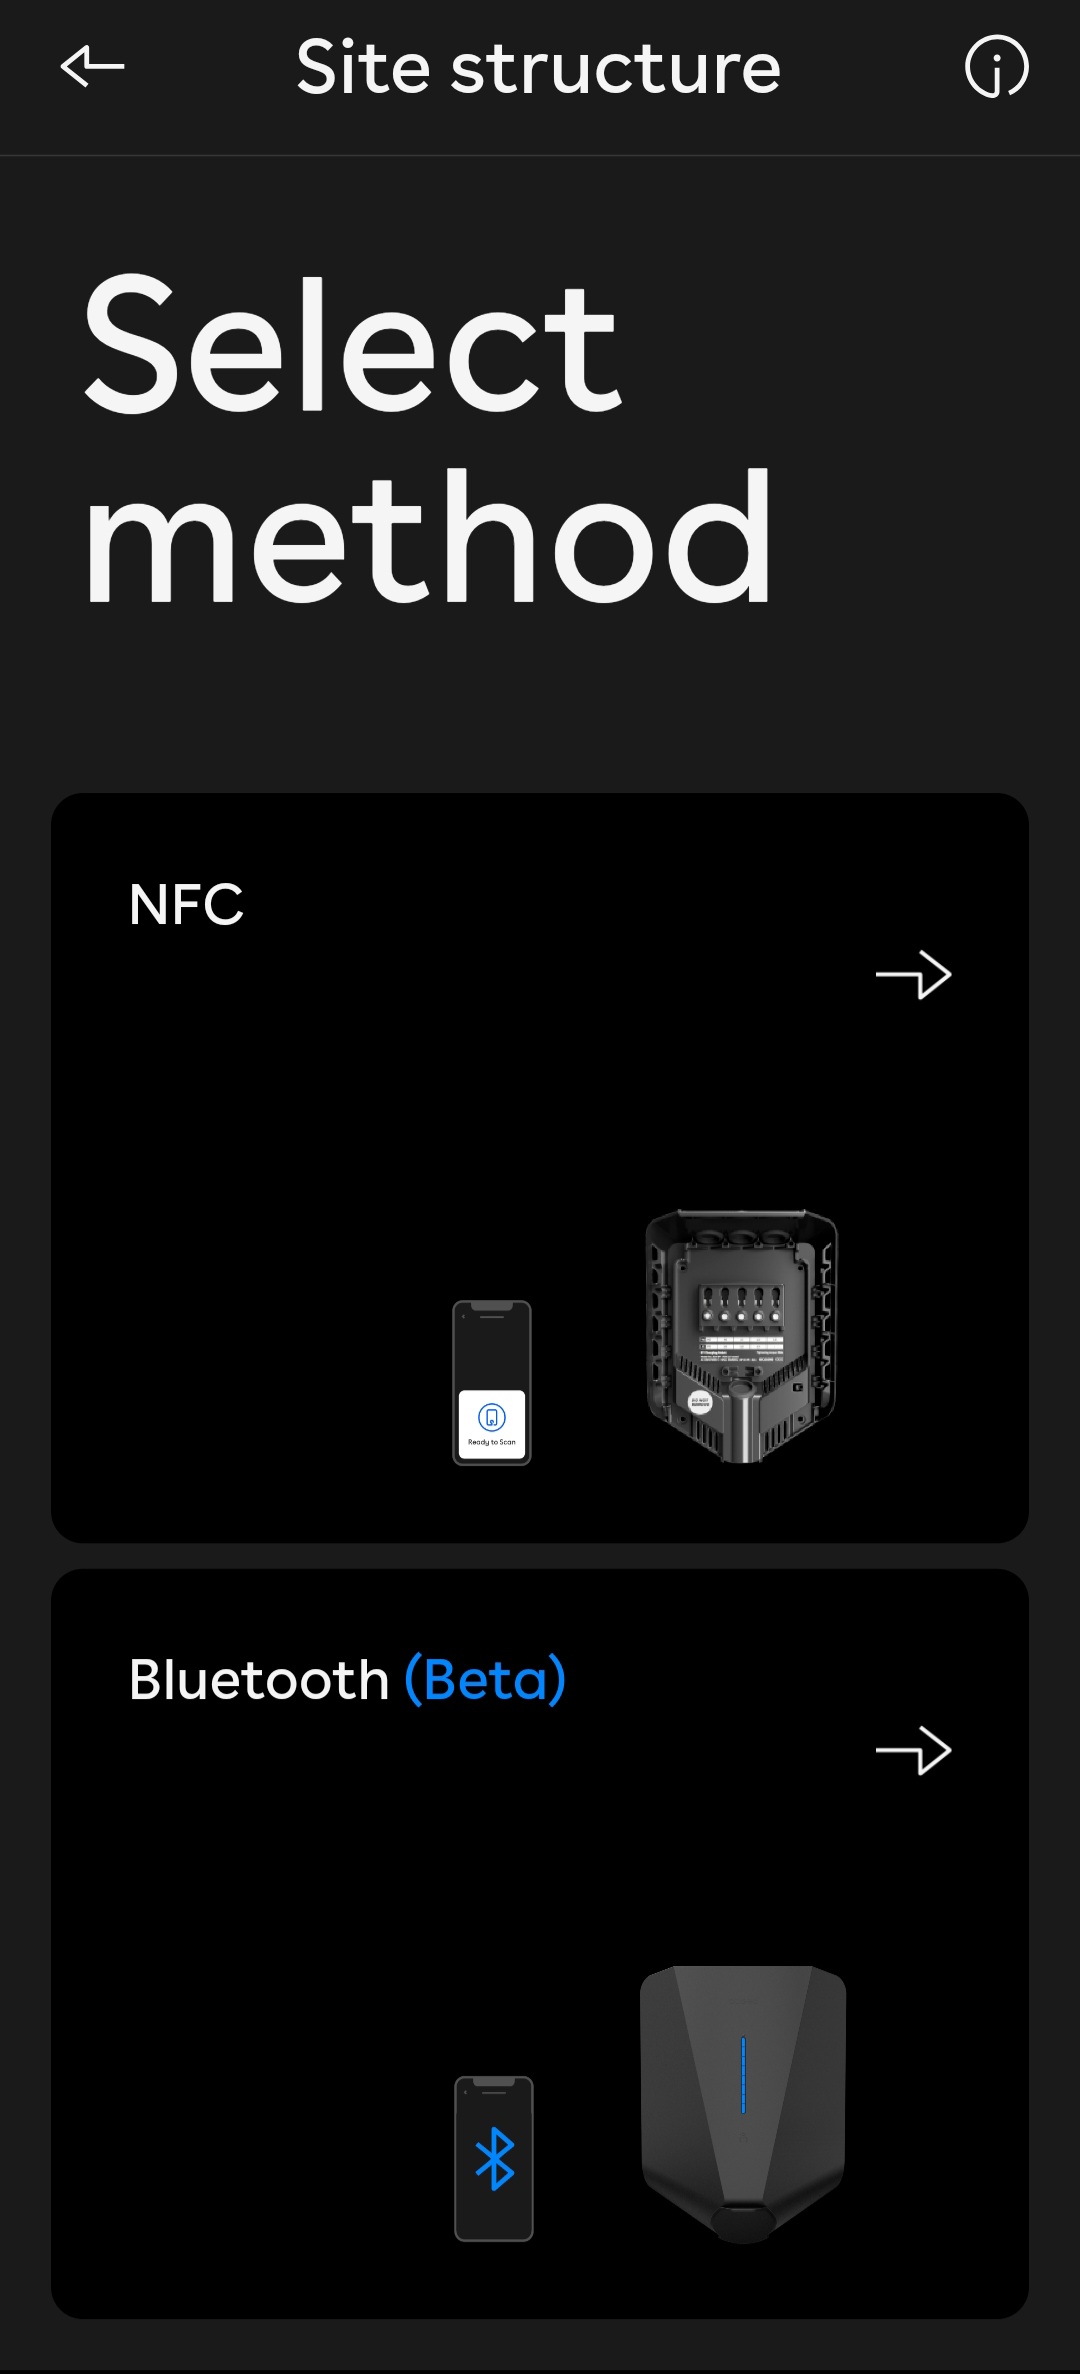 Choice of NFC with illustration, or Bluetooth with illustration